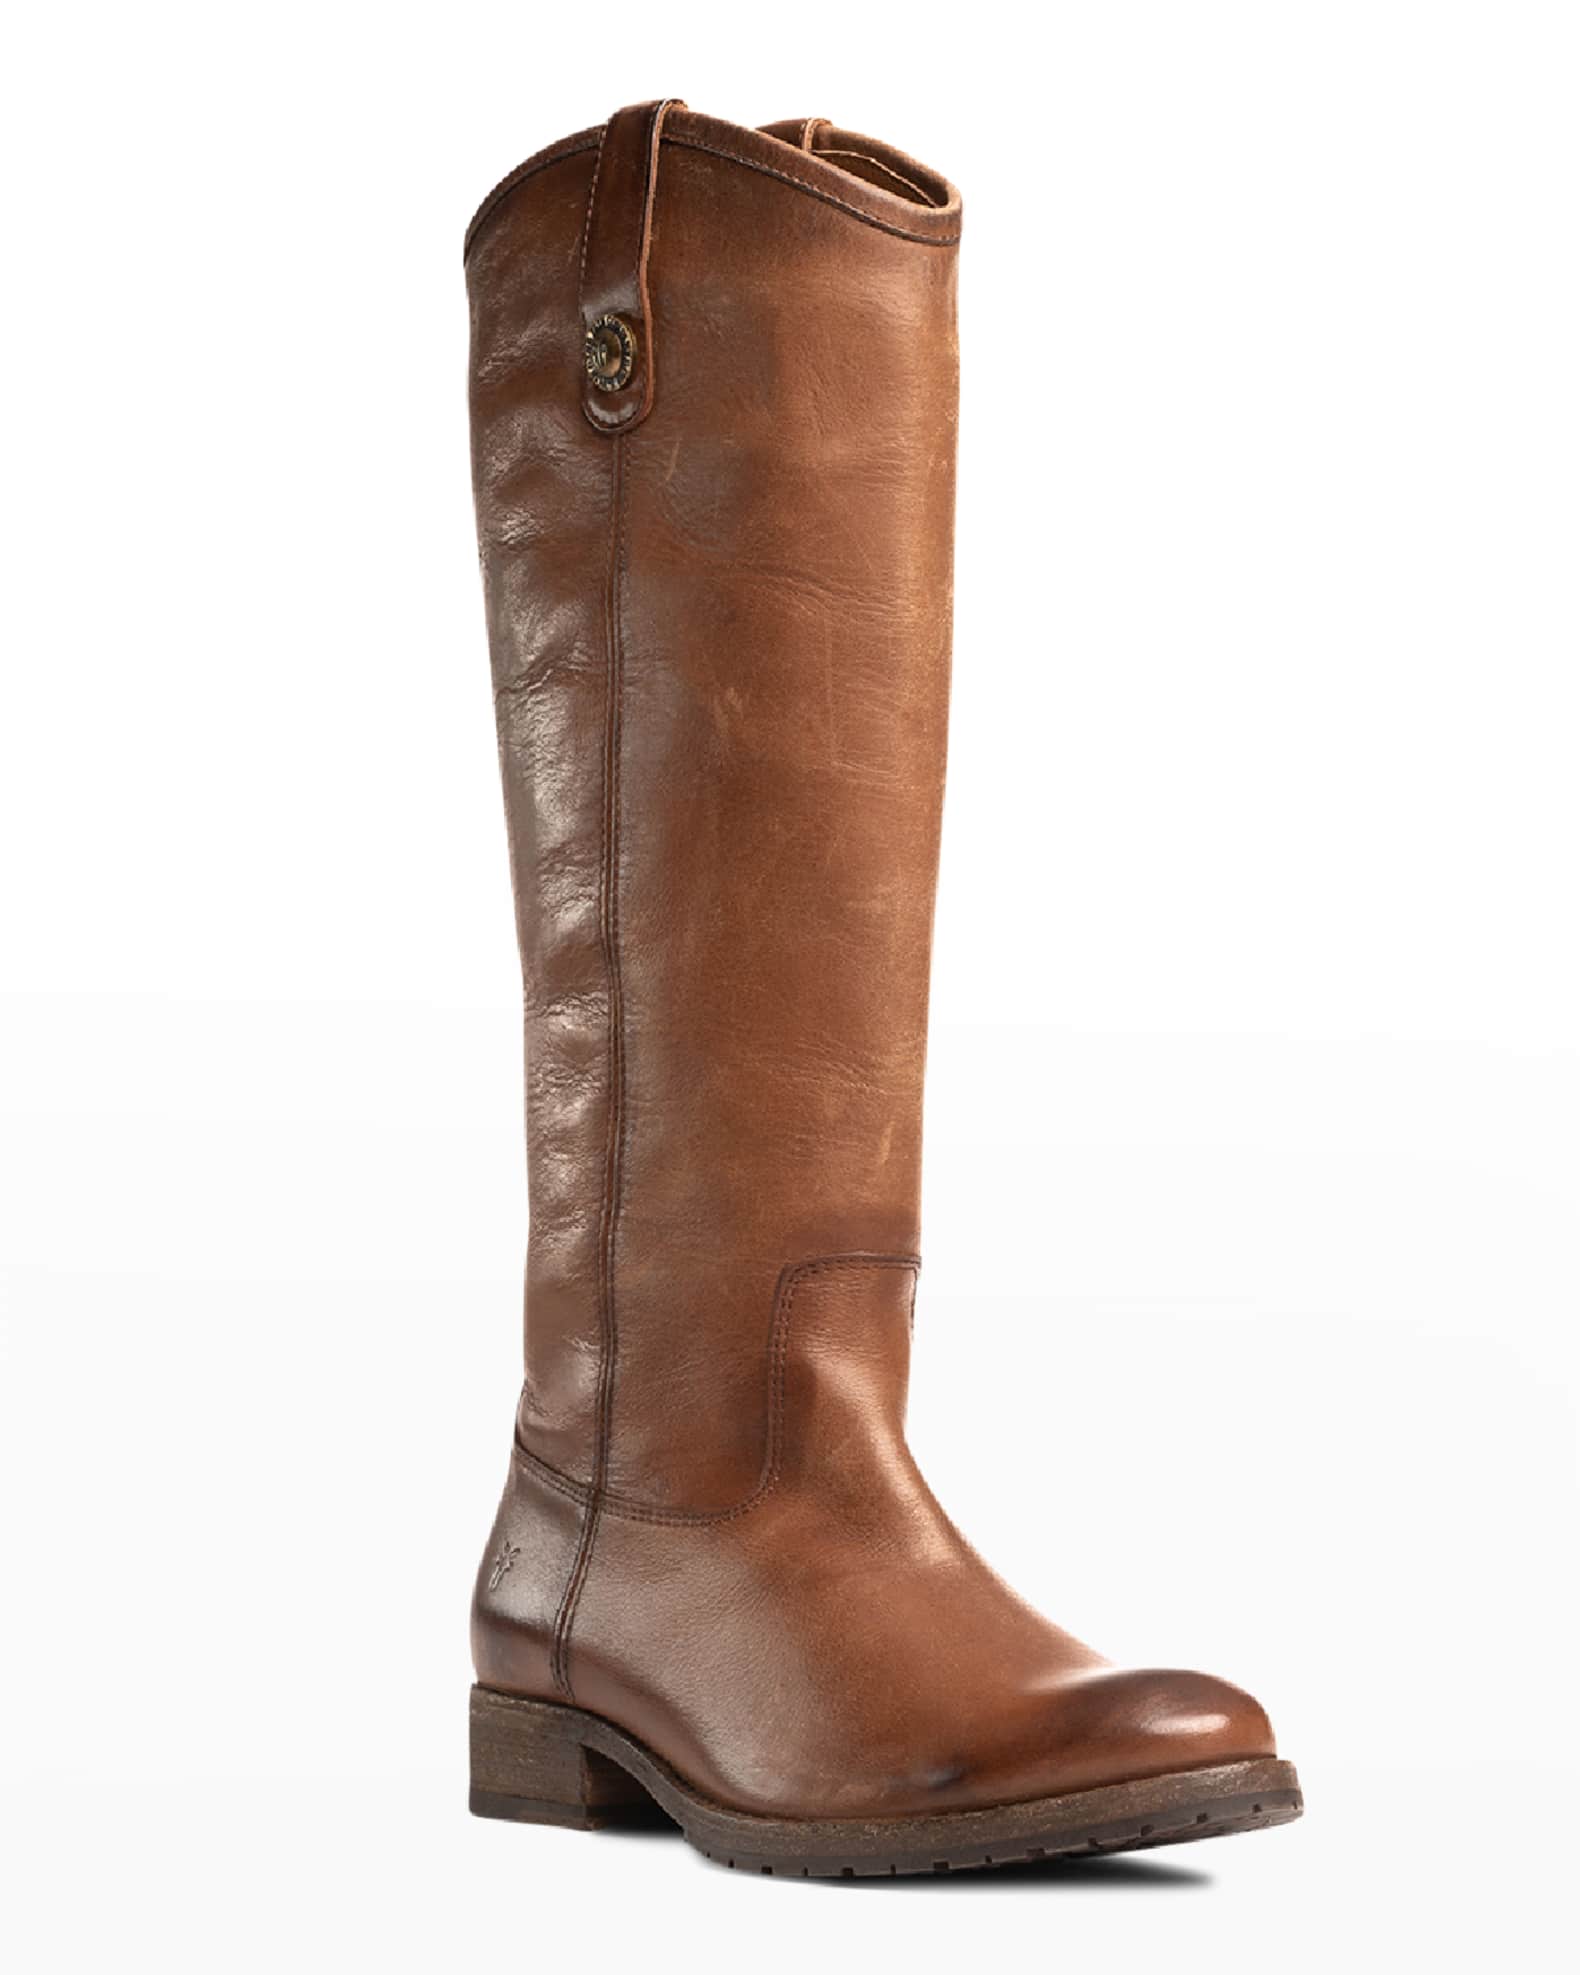 Frye Melissa Button Lug-Sole Tall Riding Boots | Neiman Marcus